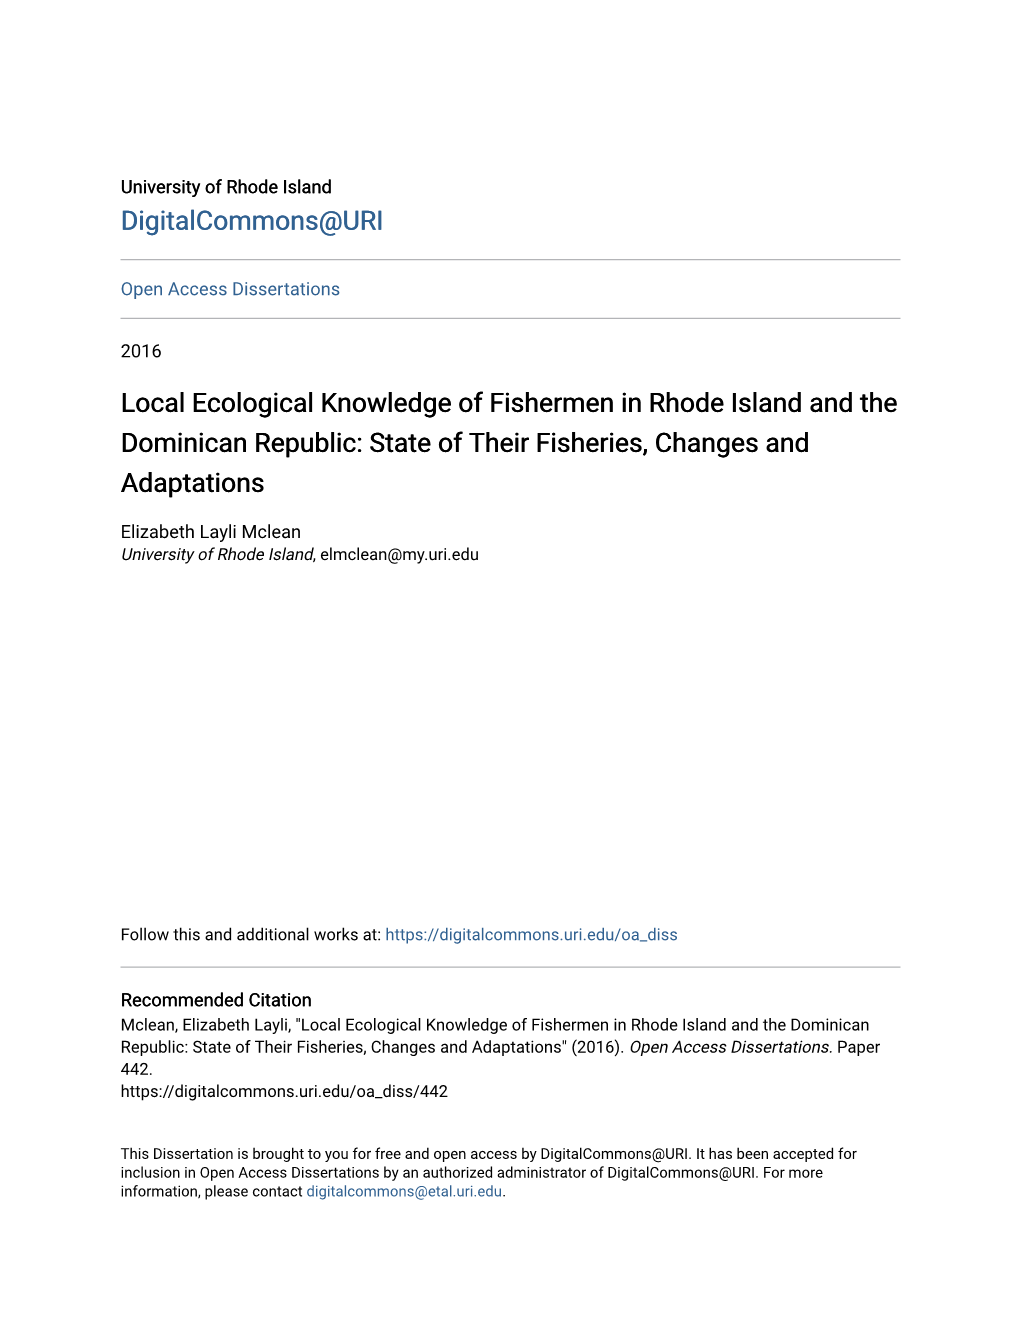 Local Ecological Knowledge of Fishermen in Rhode Island and the Dominican Republic: State of Their Fisheries, Changes and Adaptations